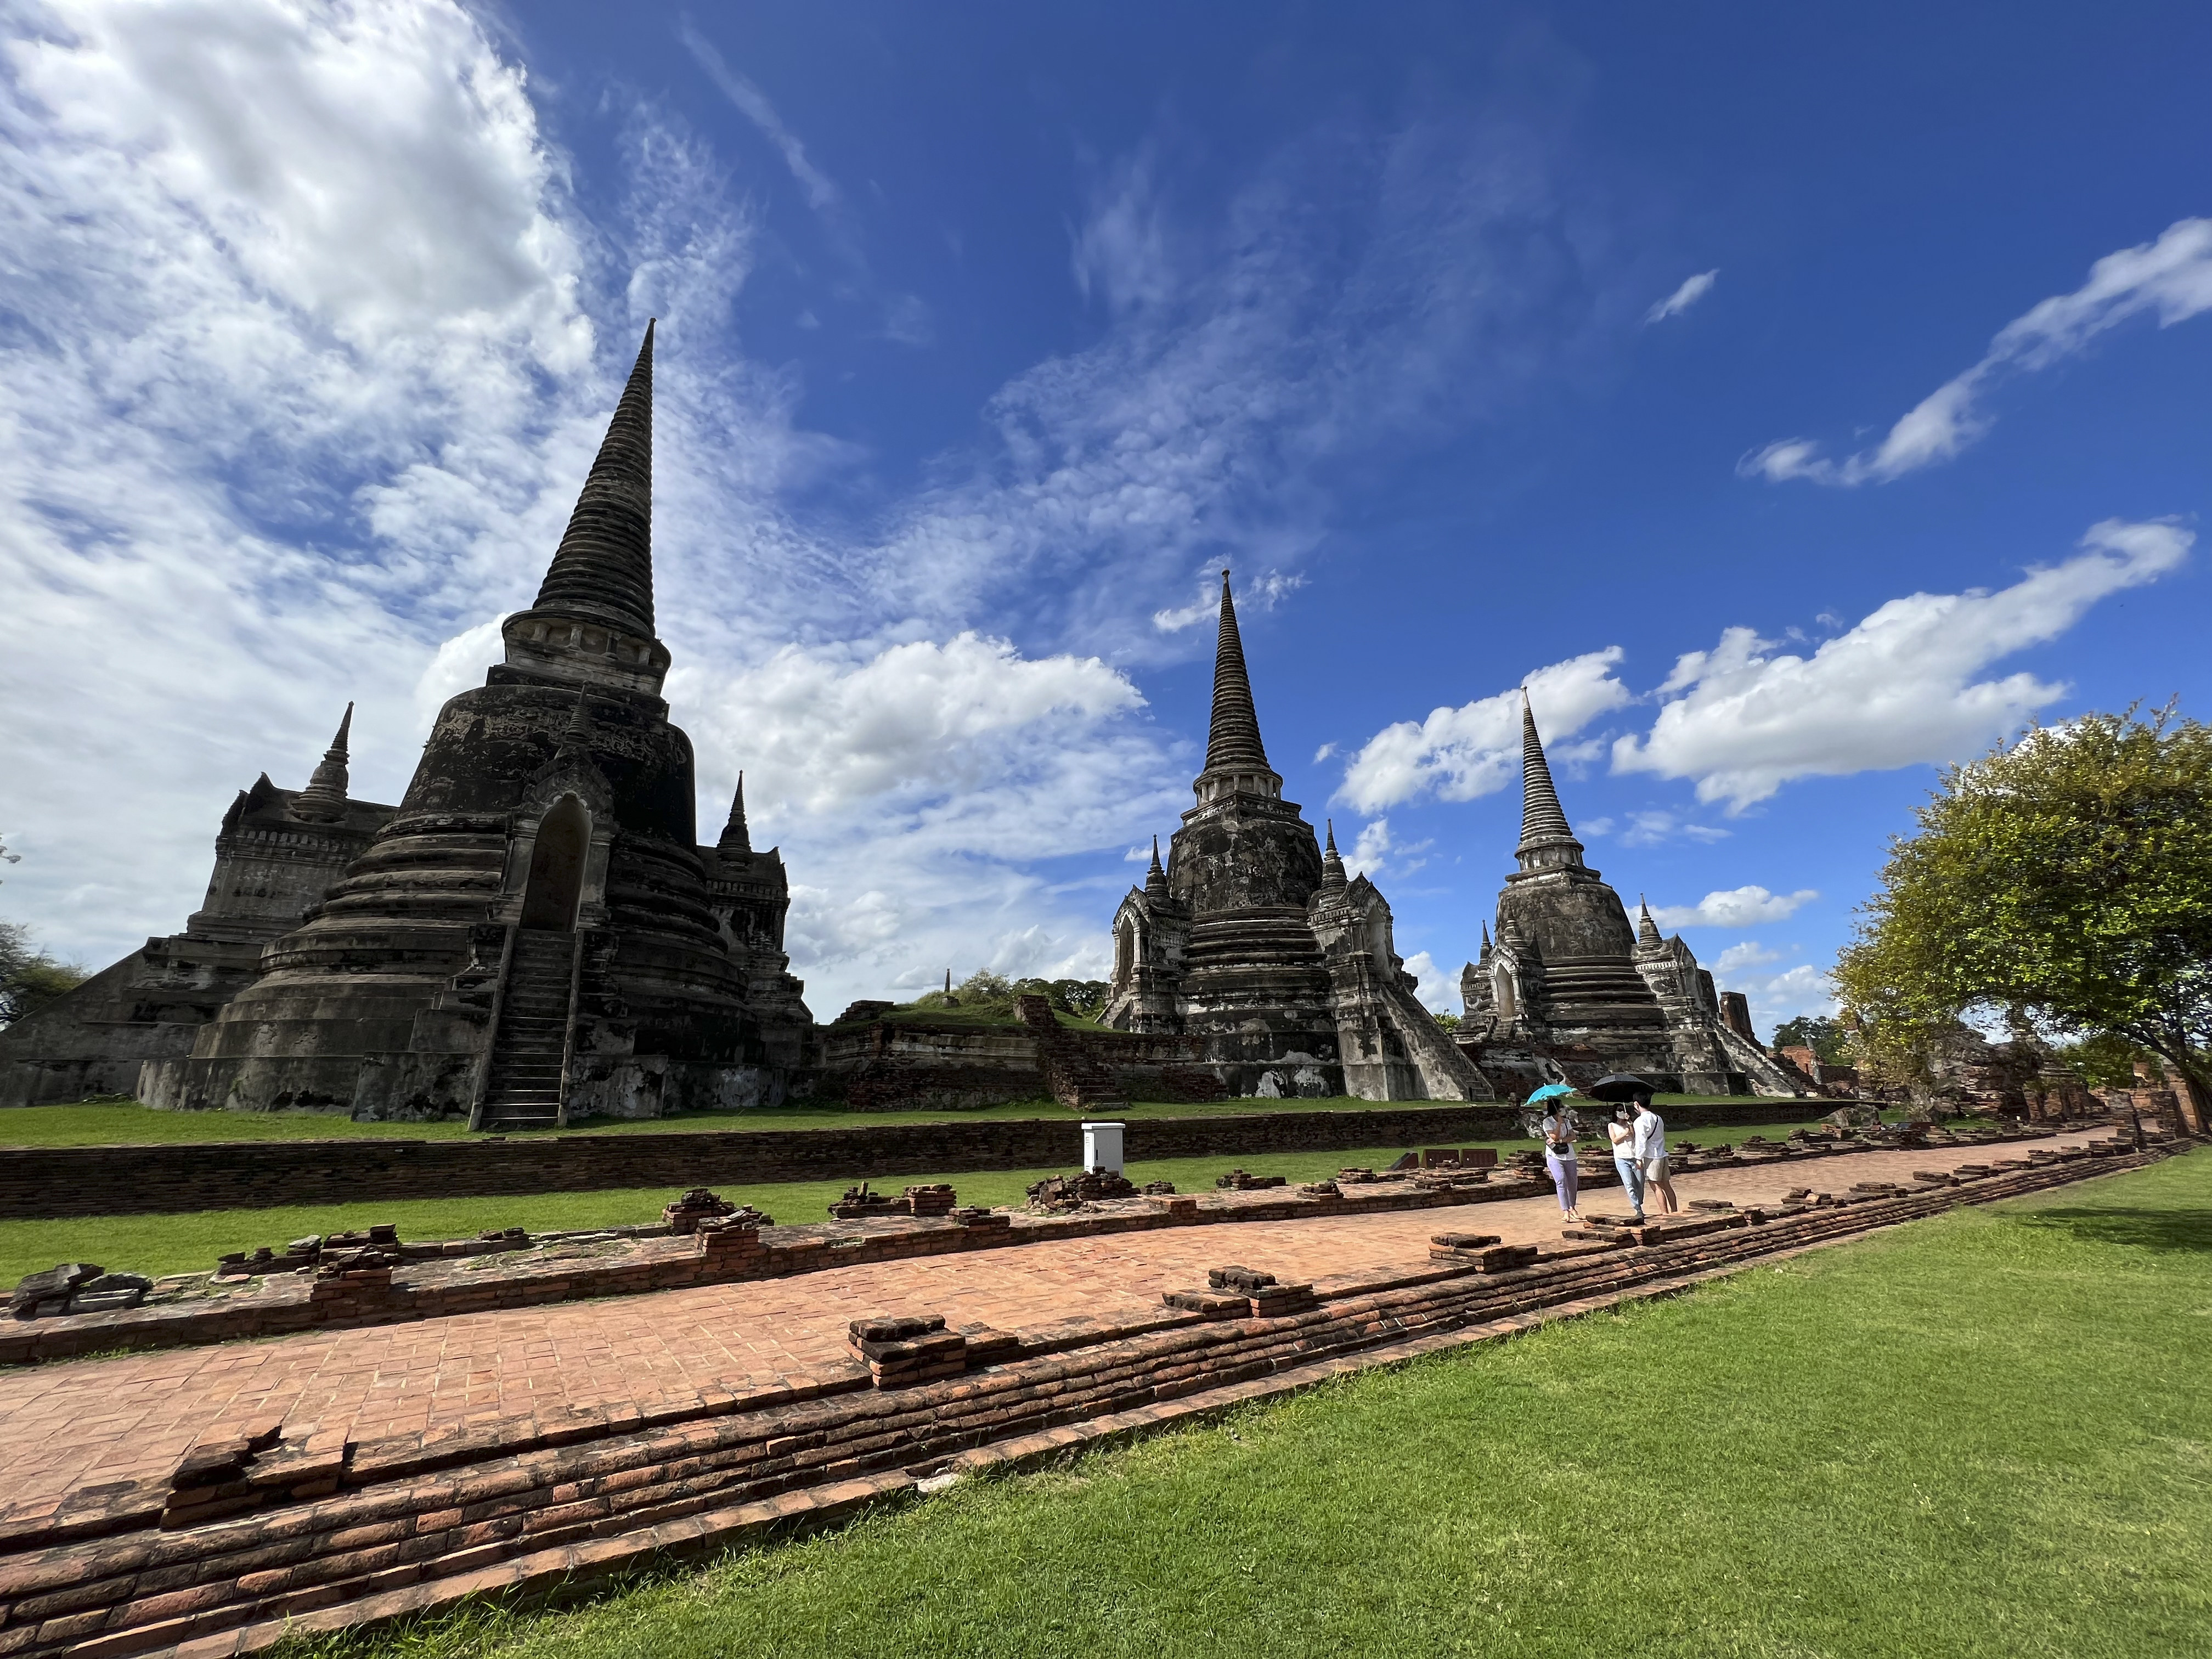 The three bell-shaped Buddhist stupas at Wat Phra Sri Sanpetch in Ayutthaya’s  old town, in Thailand, house the ashes of 15th-century kings. The temple is one of several on the itinerary of a luxury boat trip run by Anantara. Photo: Penny Watson